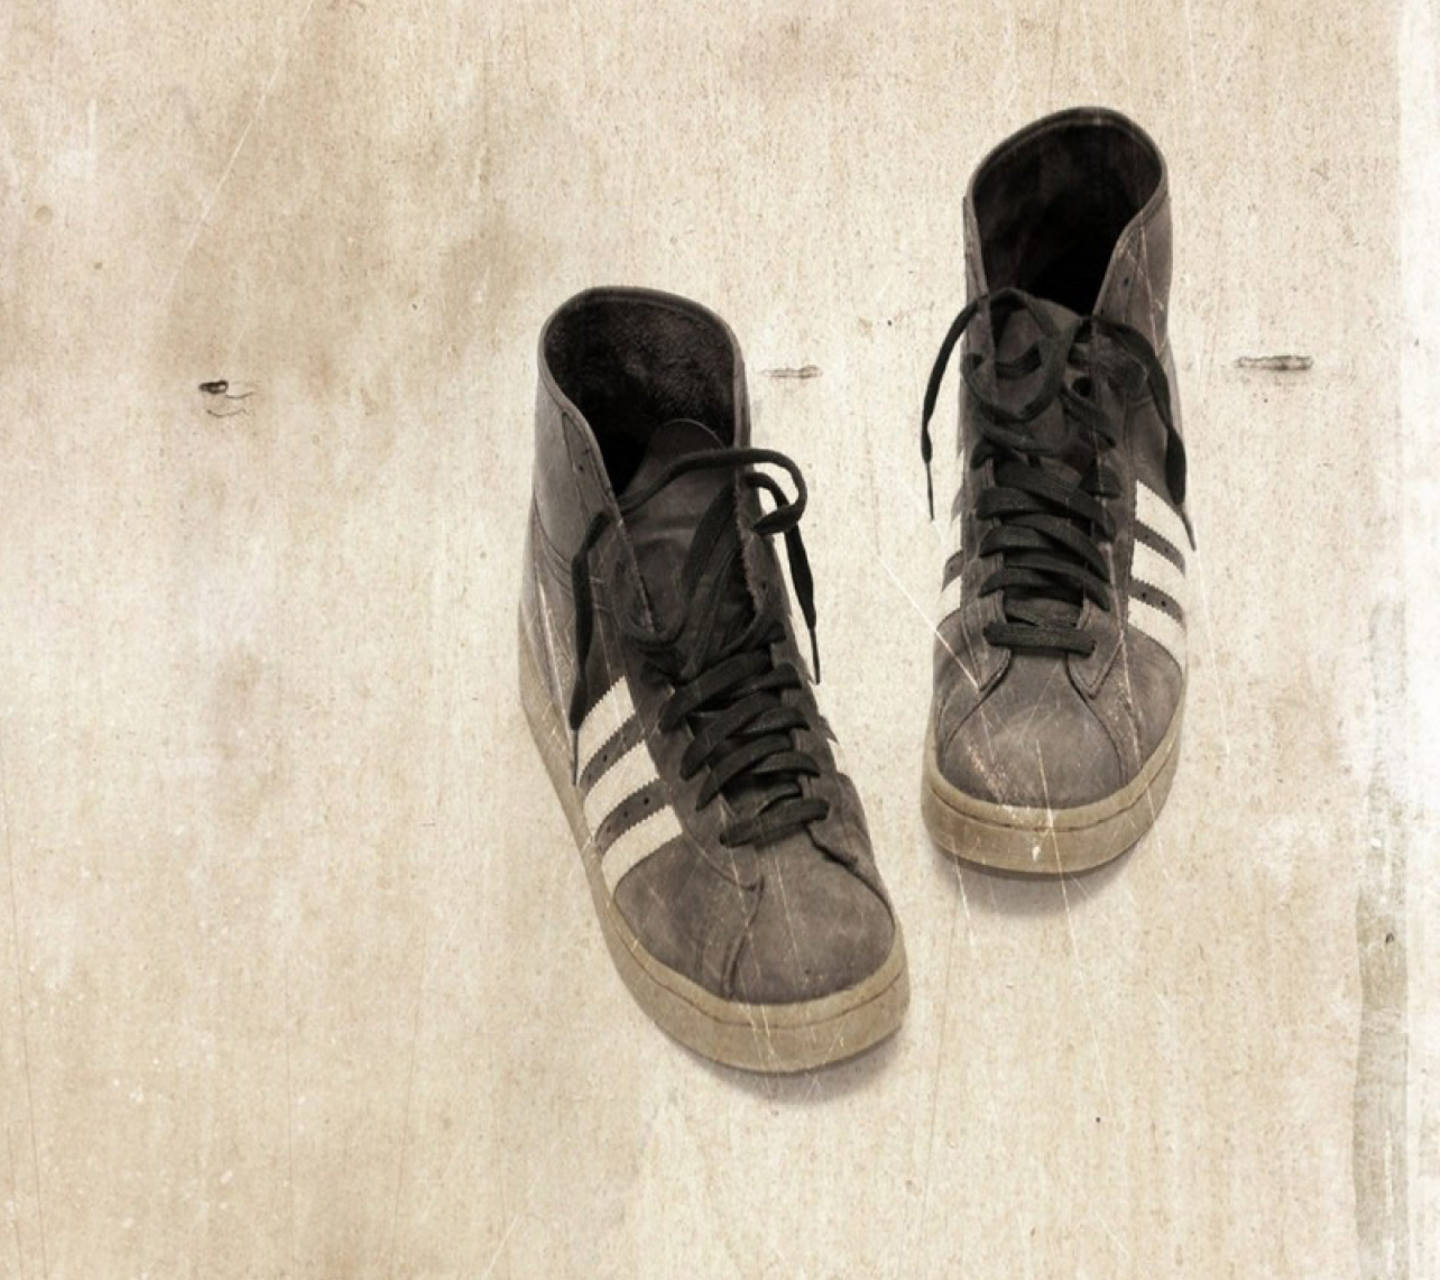 Grungy Sneakers wallpaper 1440x1280